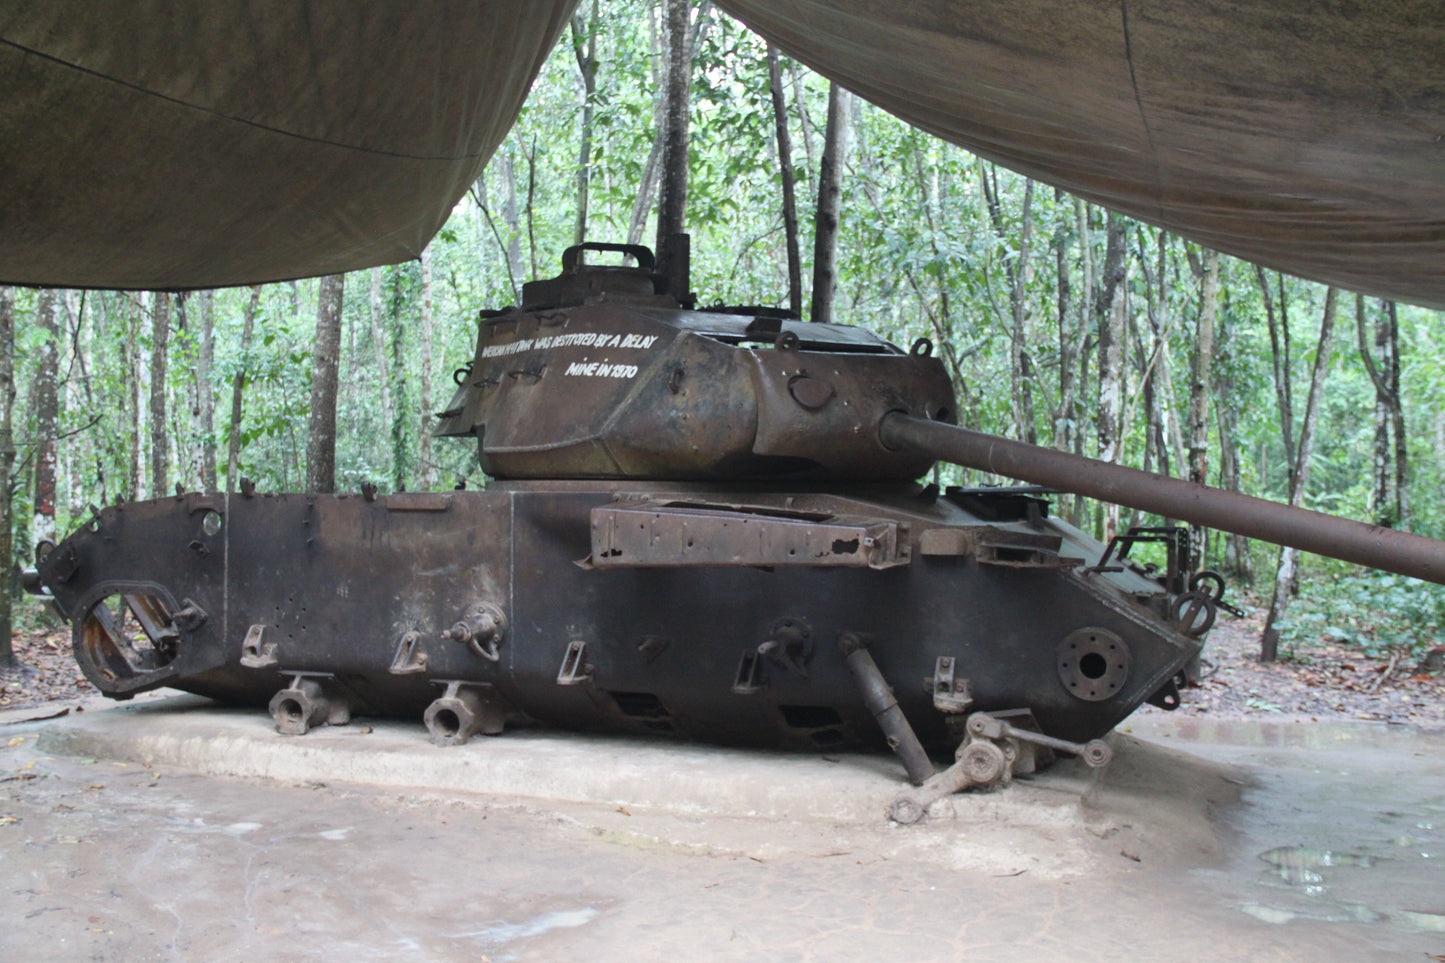 76B: Cu Chi Tunnels, Mekong Delta, Boat Tour, Red Brick Pottery Village